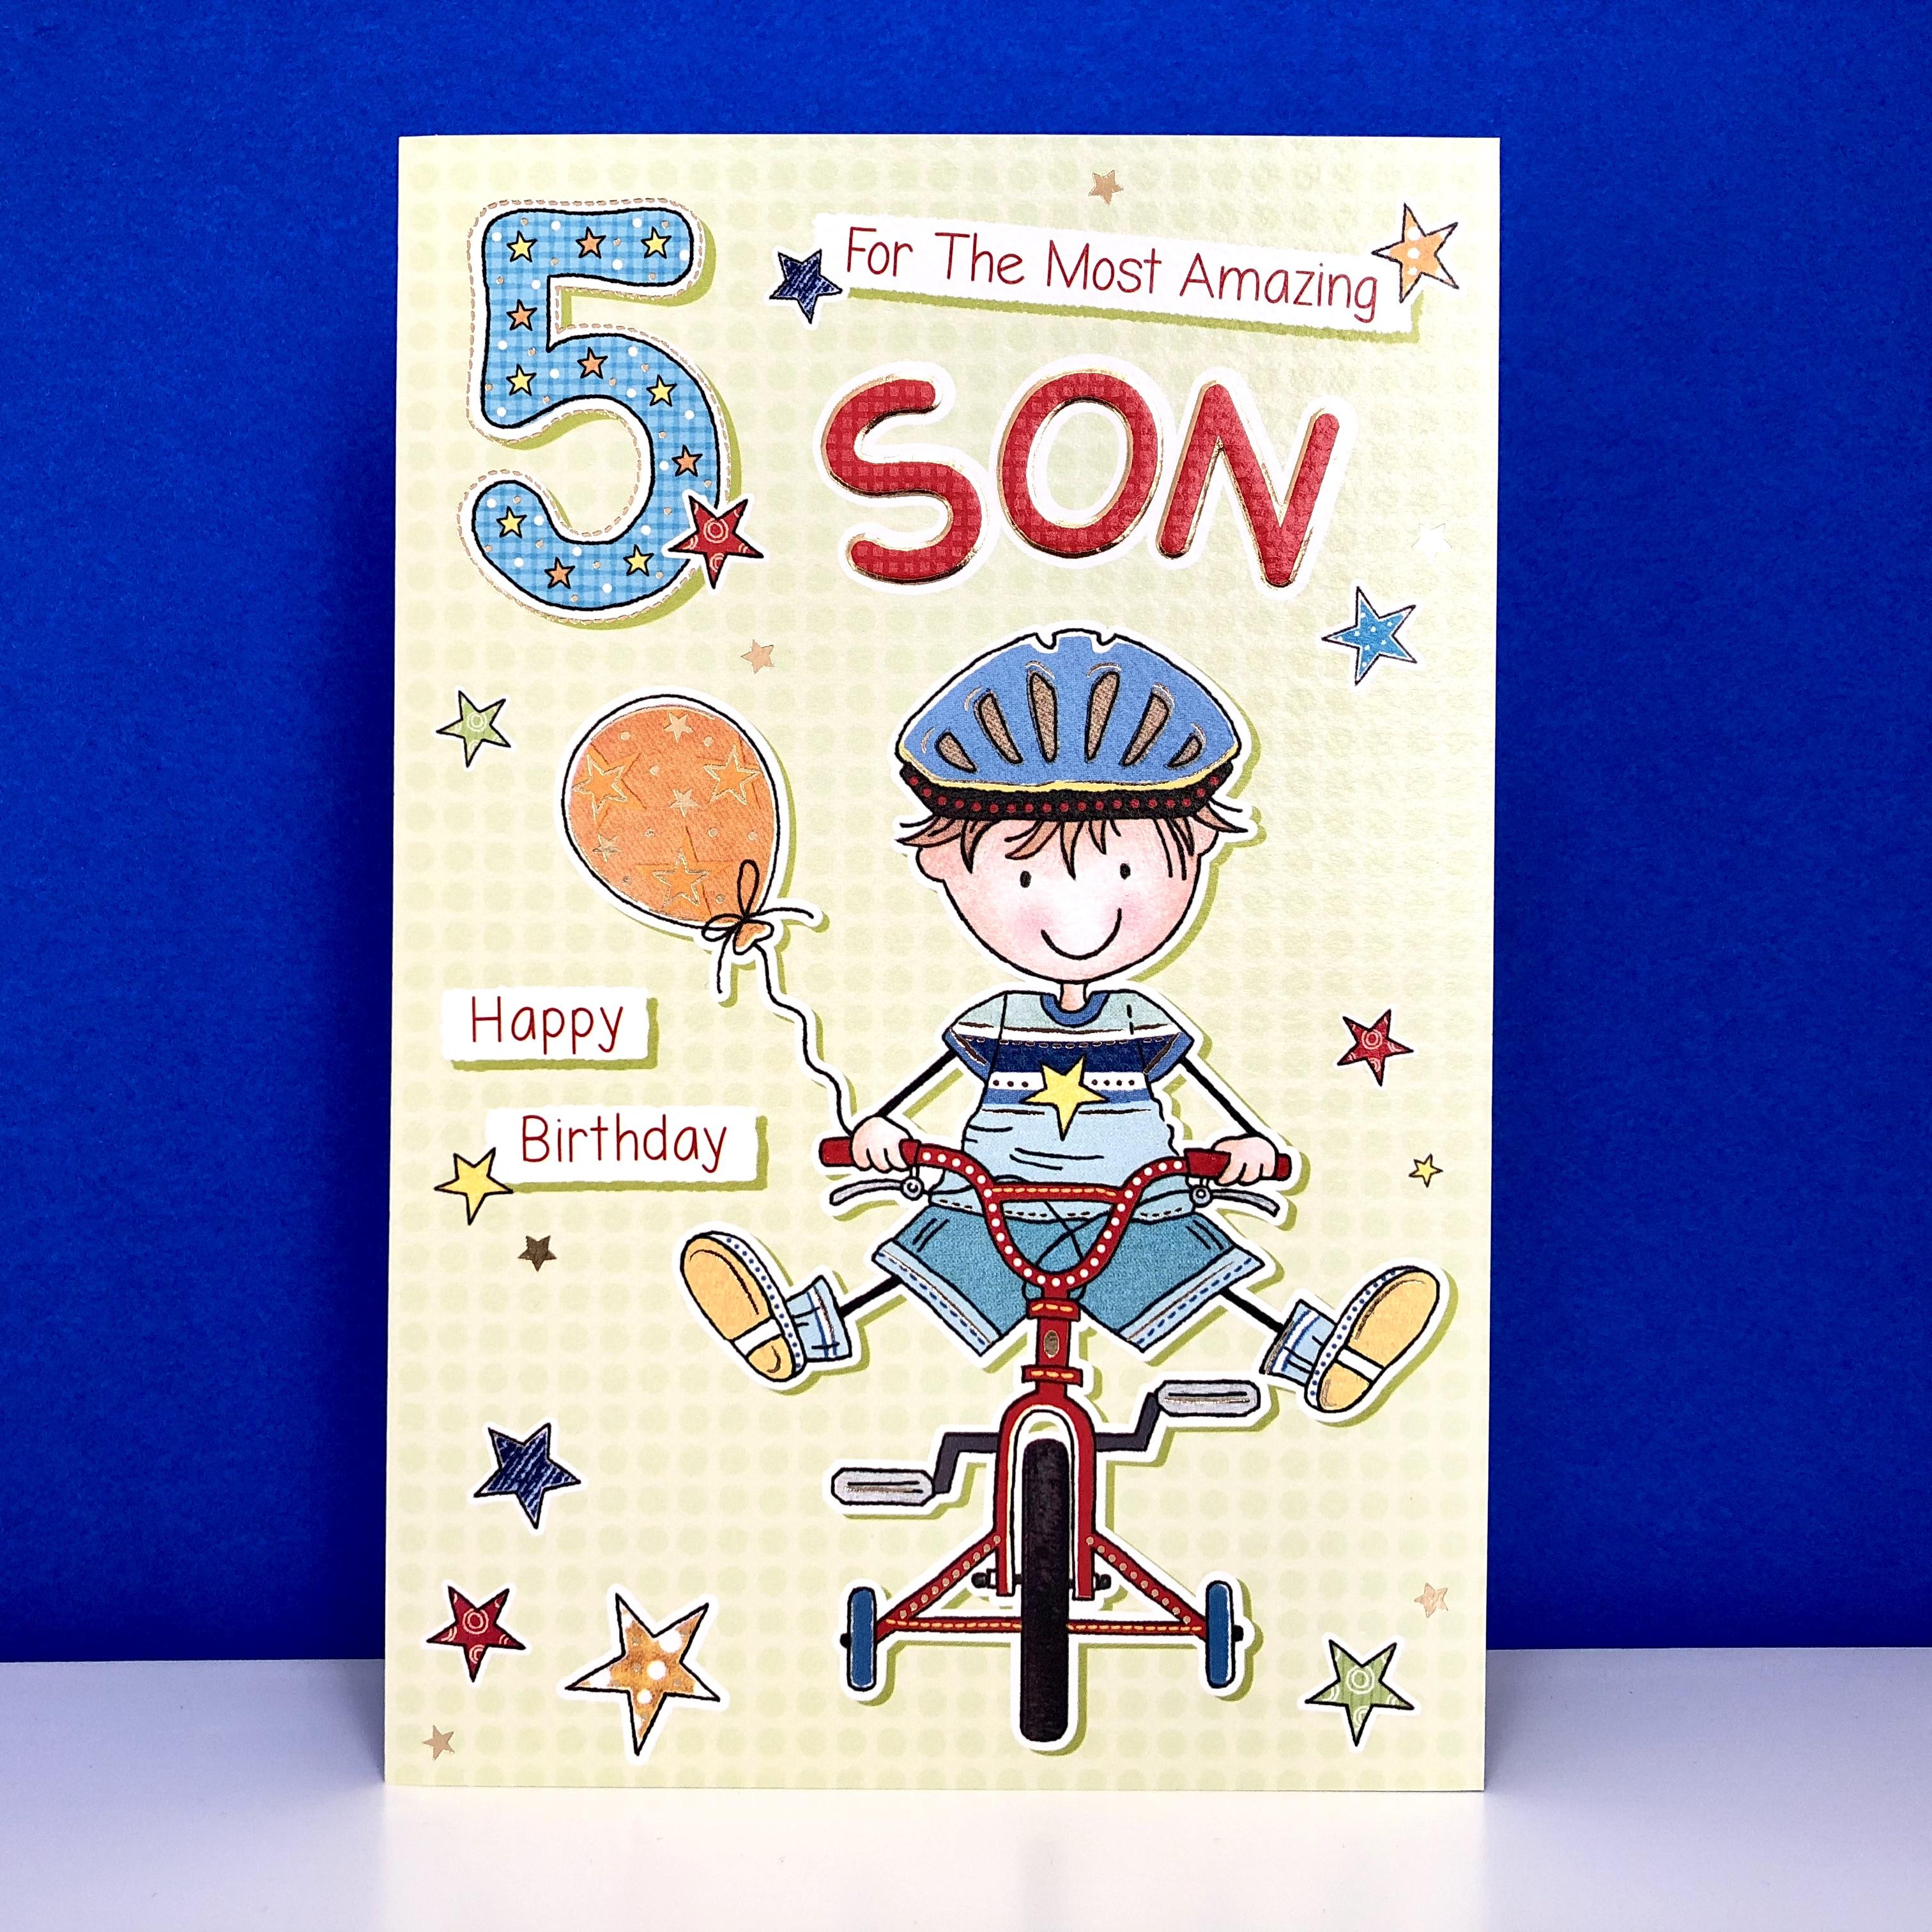 Most Amazing Son Age 5 Birthday Card Sat On A Wooden Display Shelf